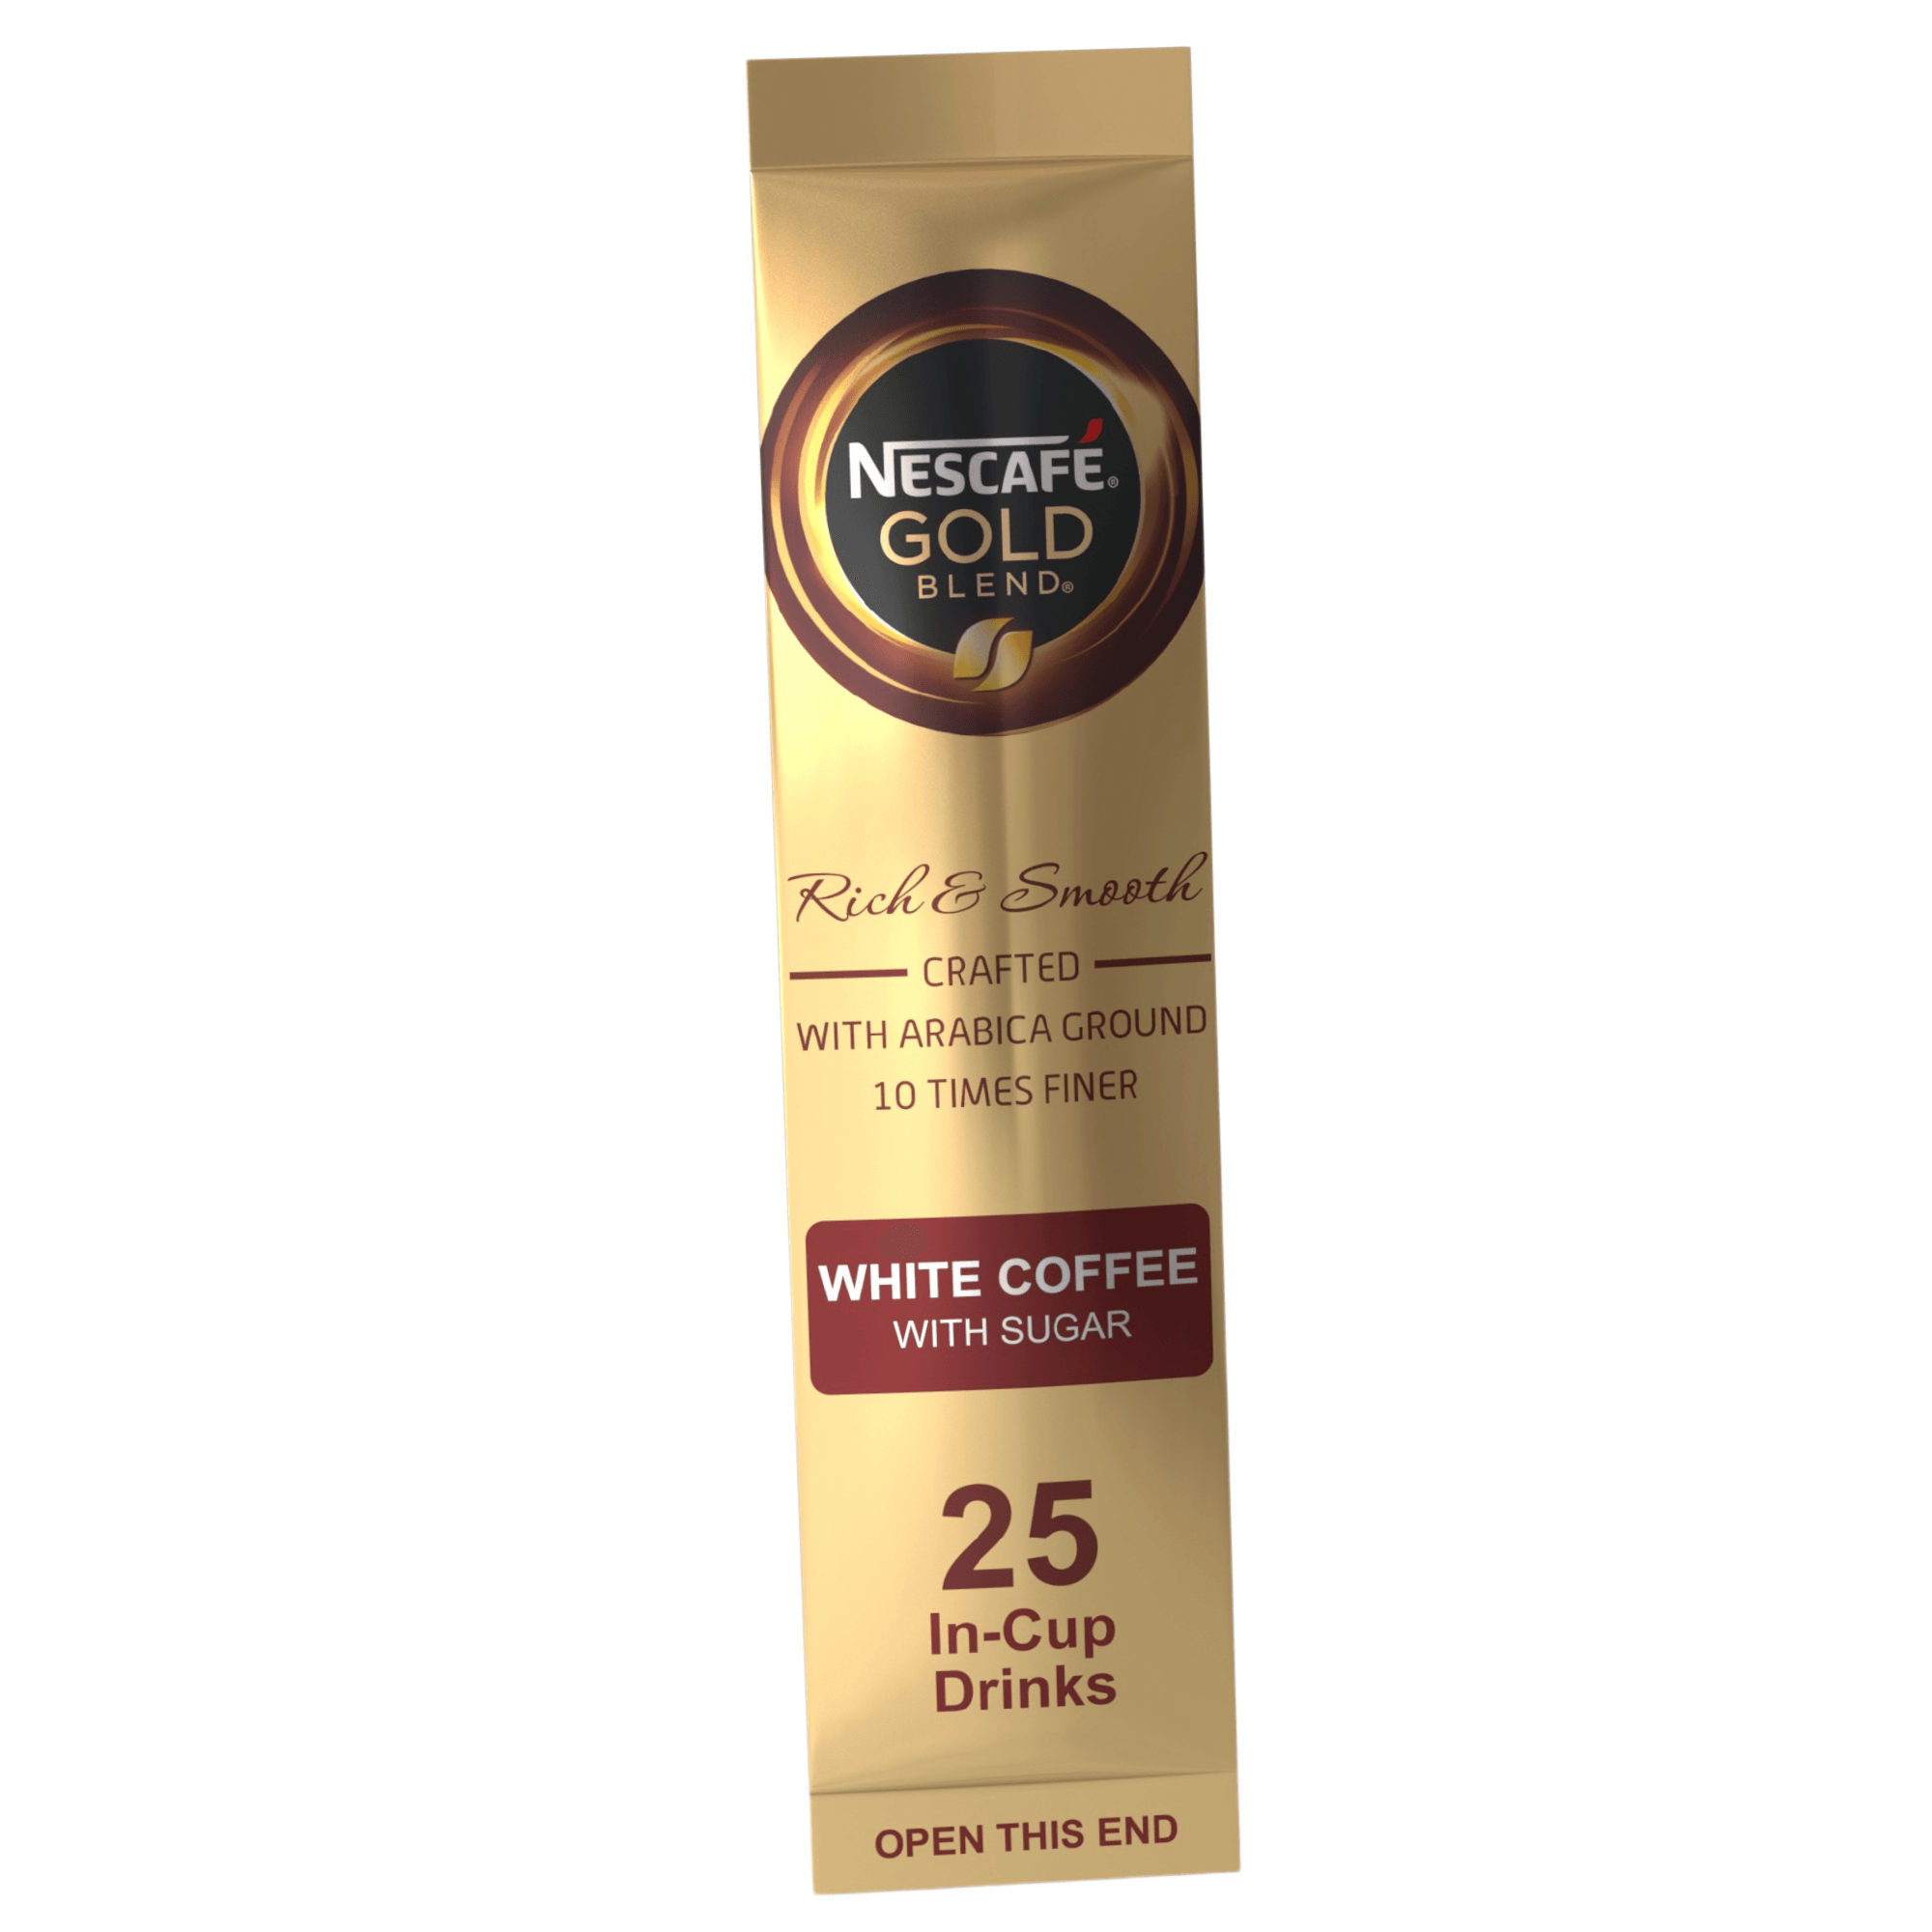 Incup Vending Drinks - Nescafe Gold Blend White Coffee With Sugar - Case Of 300 Cups - Vending Superstore